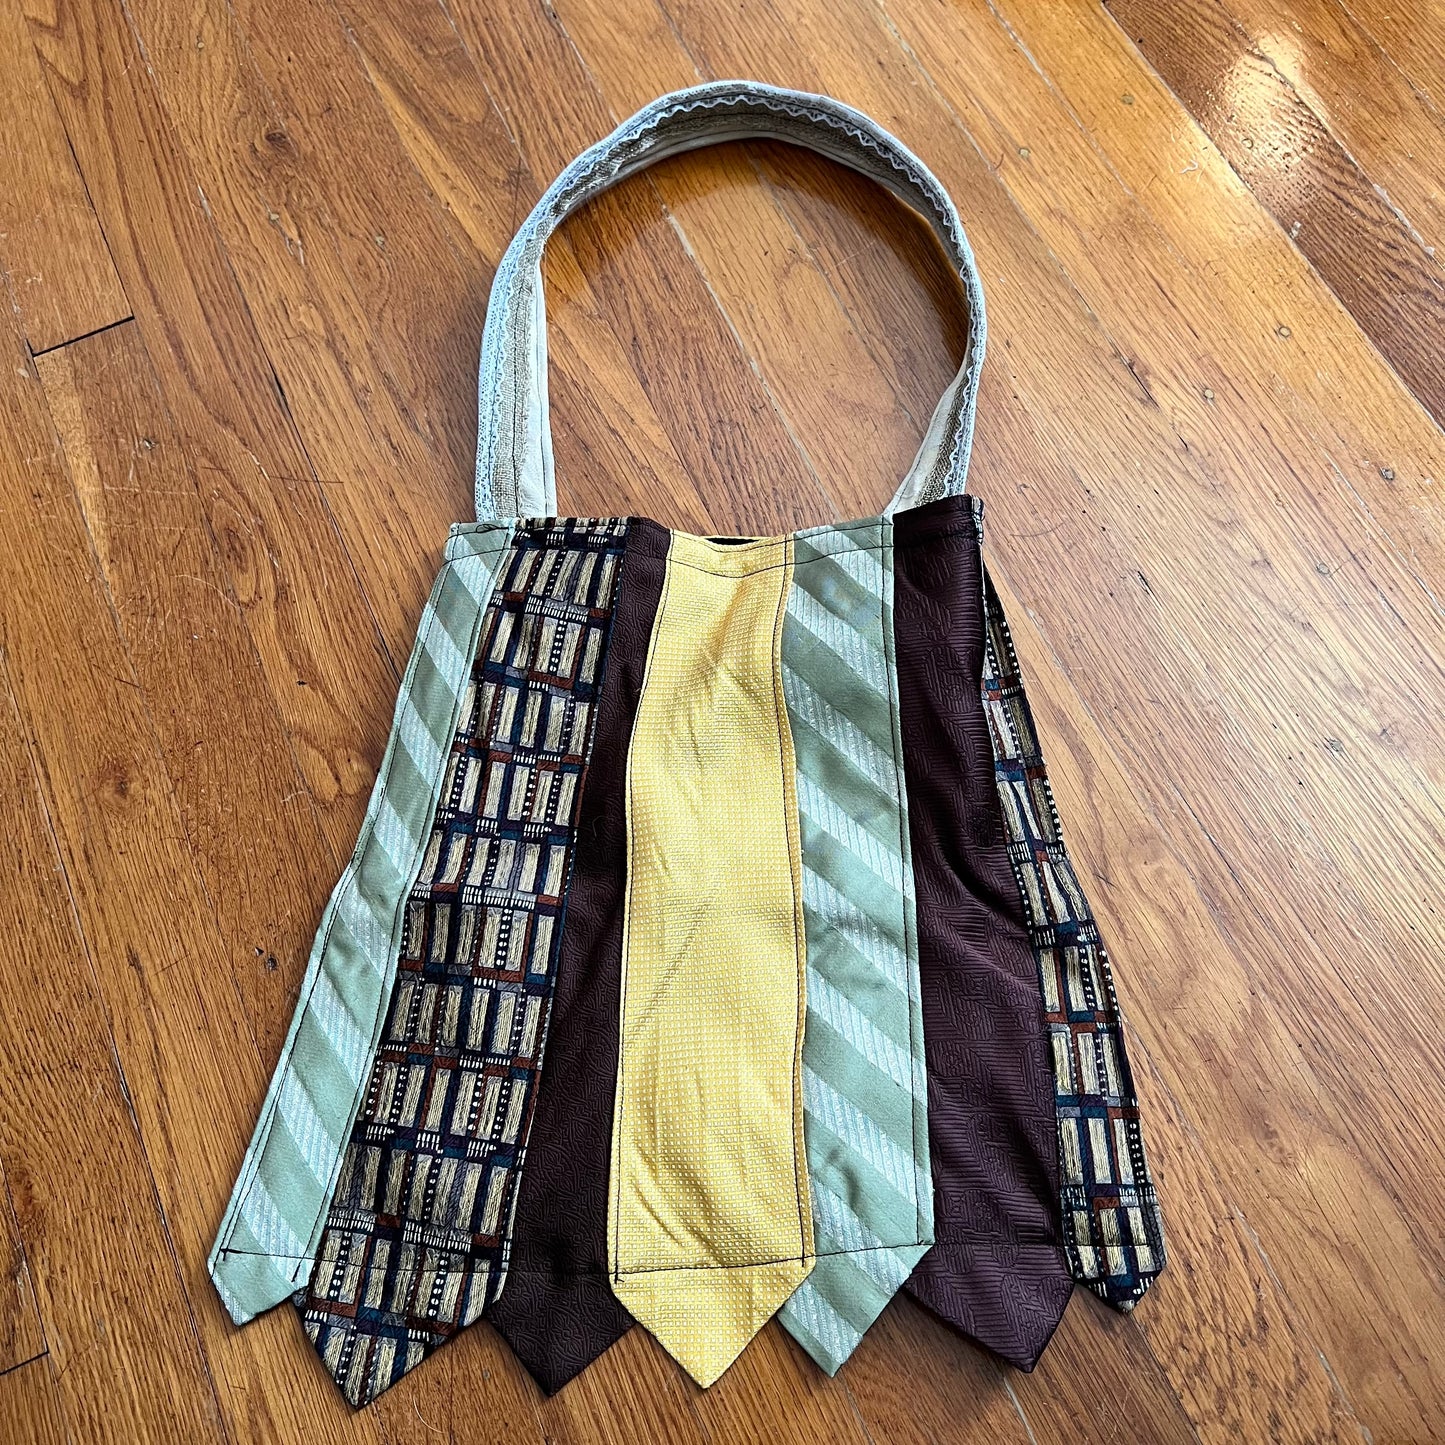 Tote bag created out of neckties in sage green, yellow, brown. wood floor background